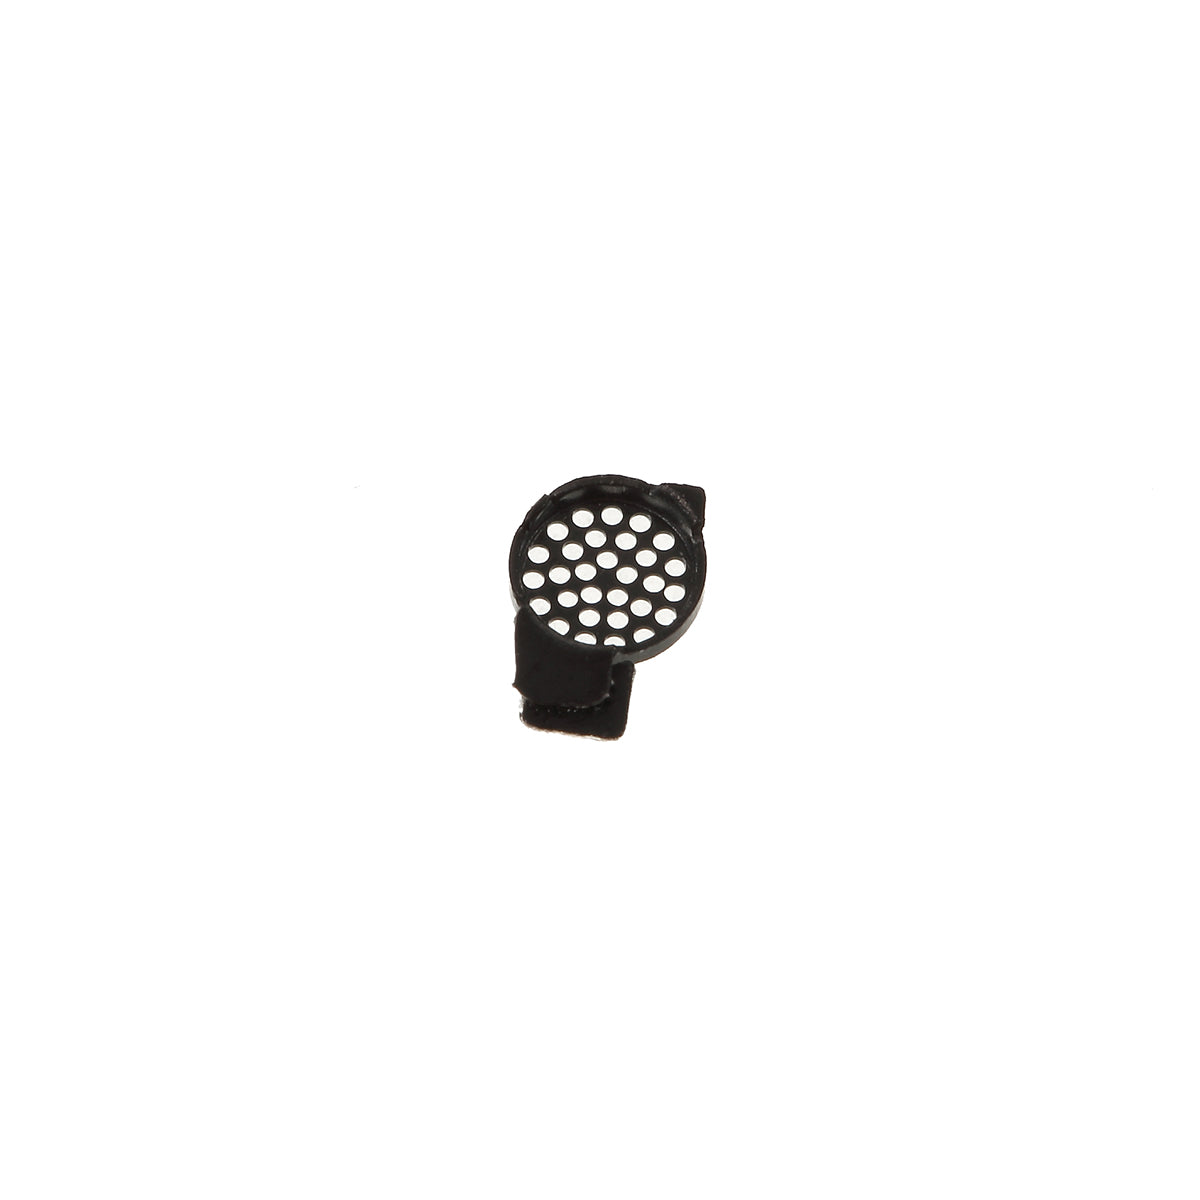 OEM Earpiece Mesh Replacement Part for Huawei P20 Pro / P20